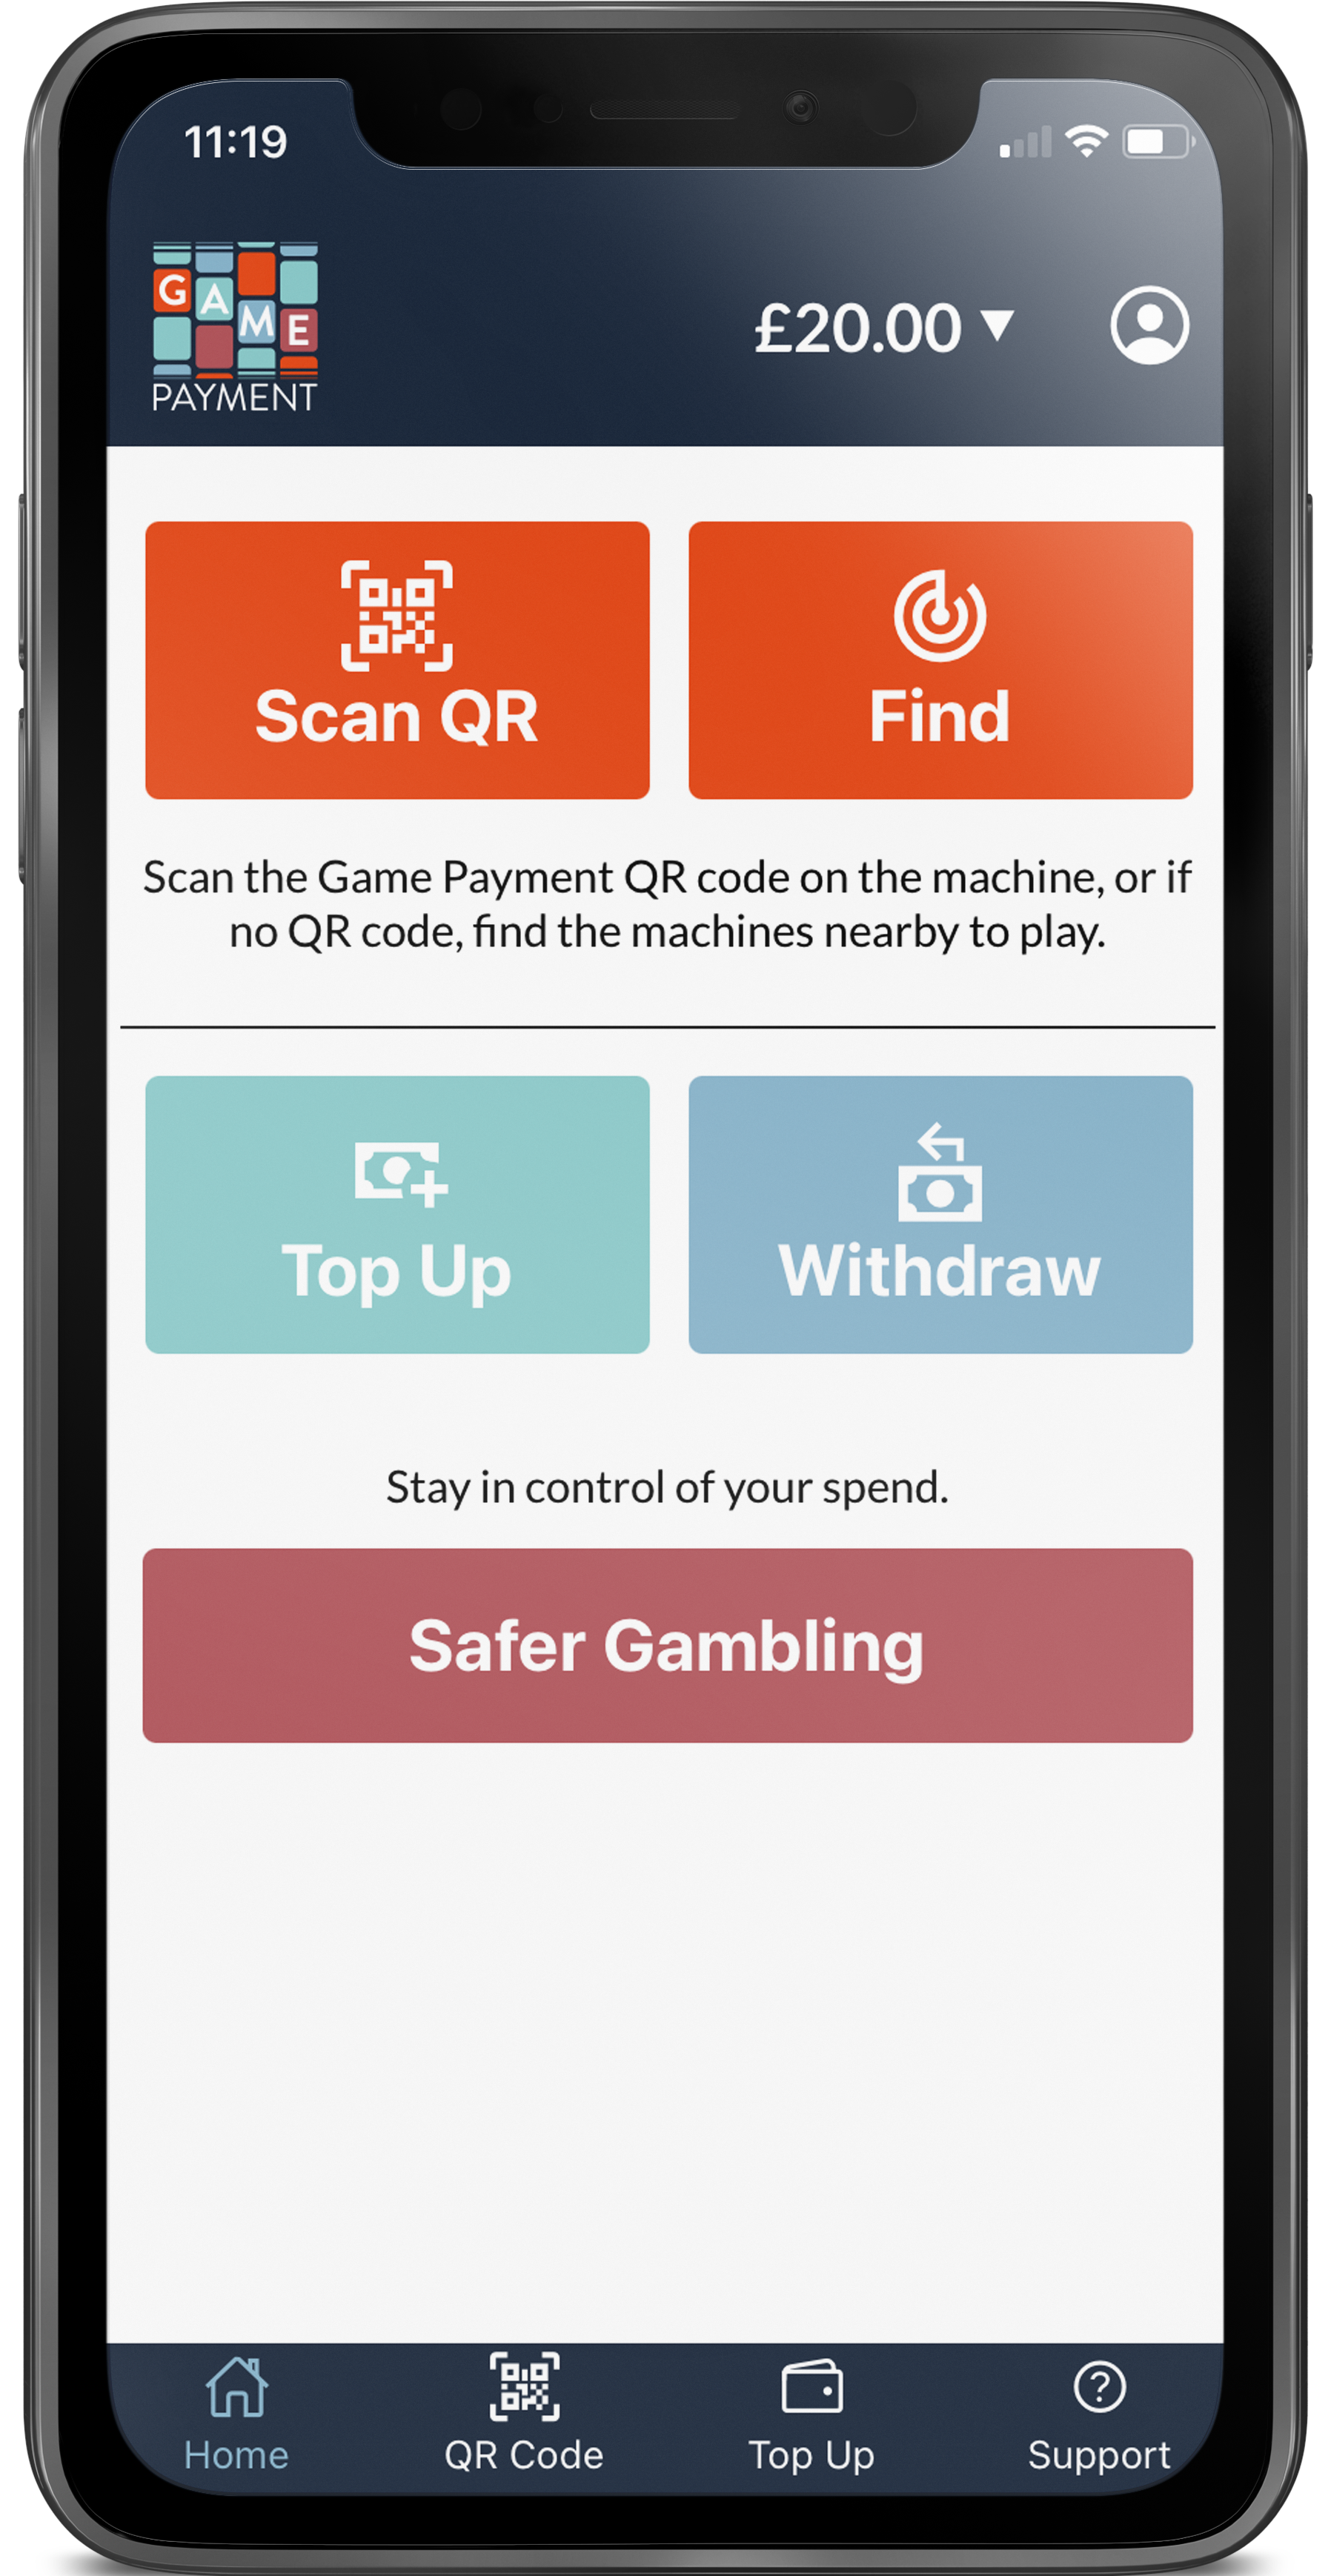 GAME PAYMENT APP